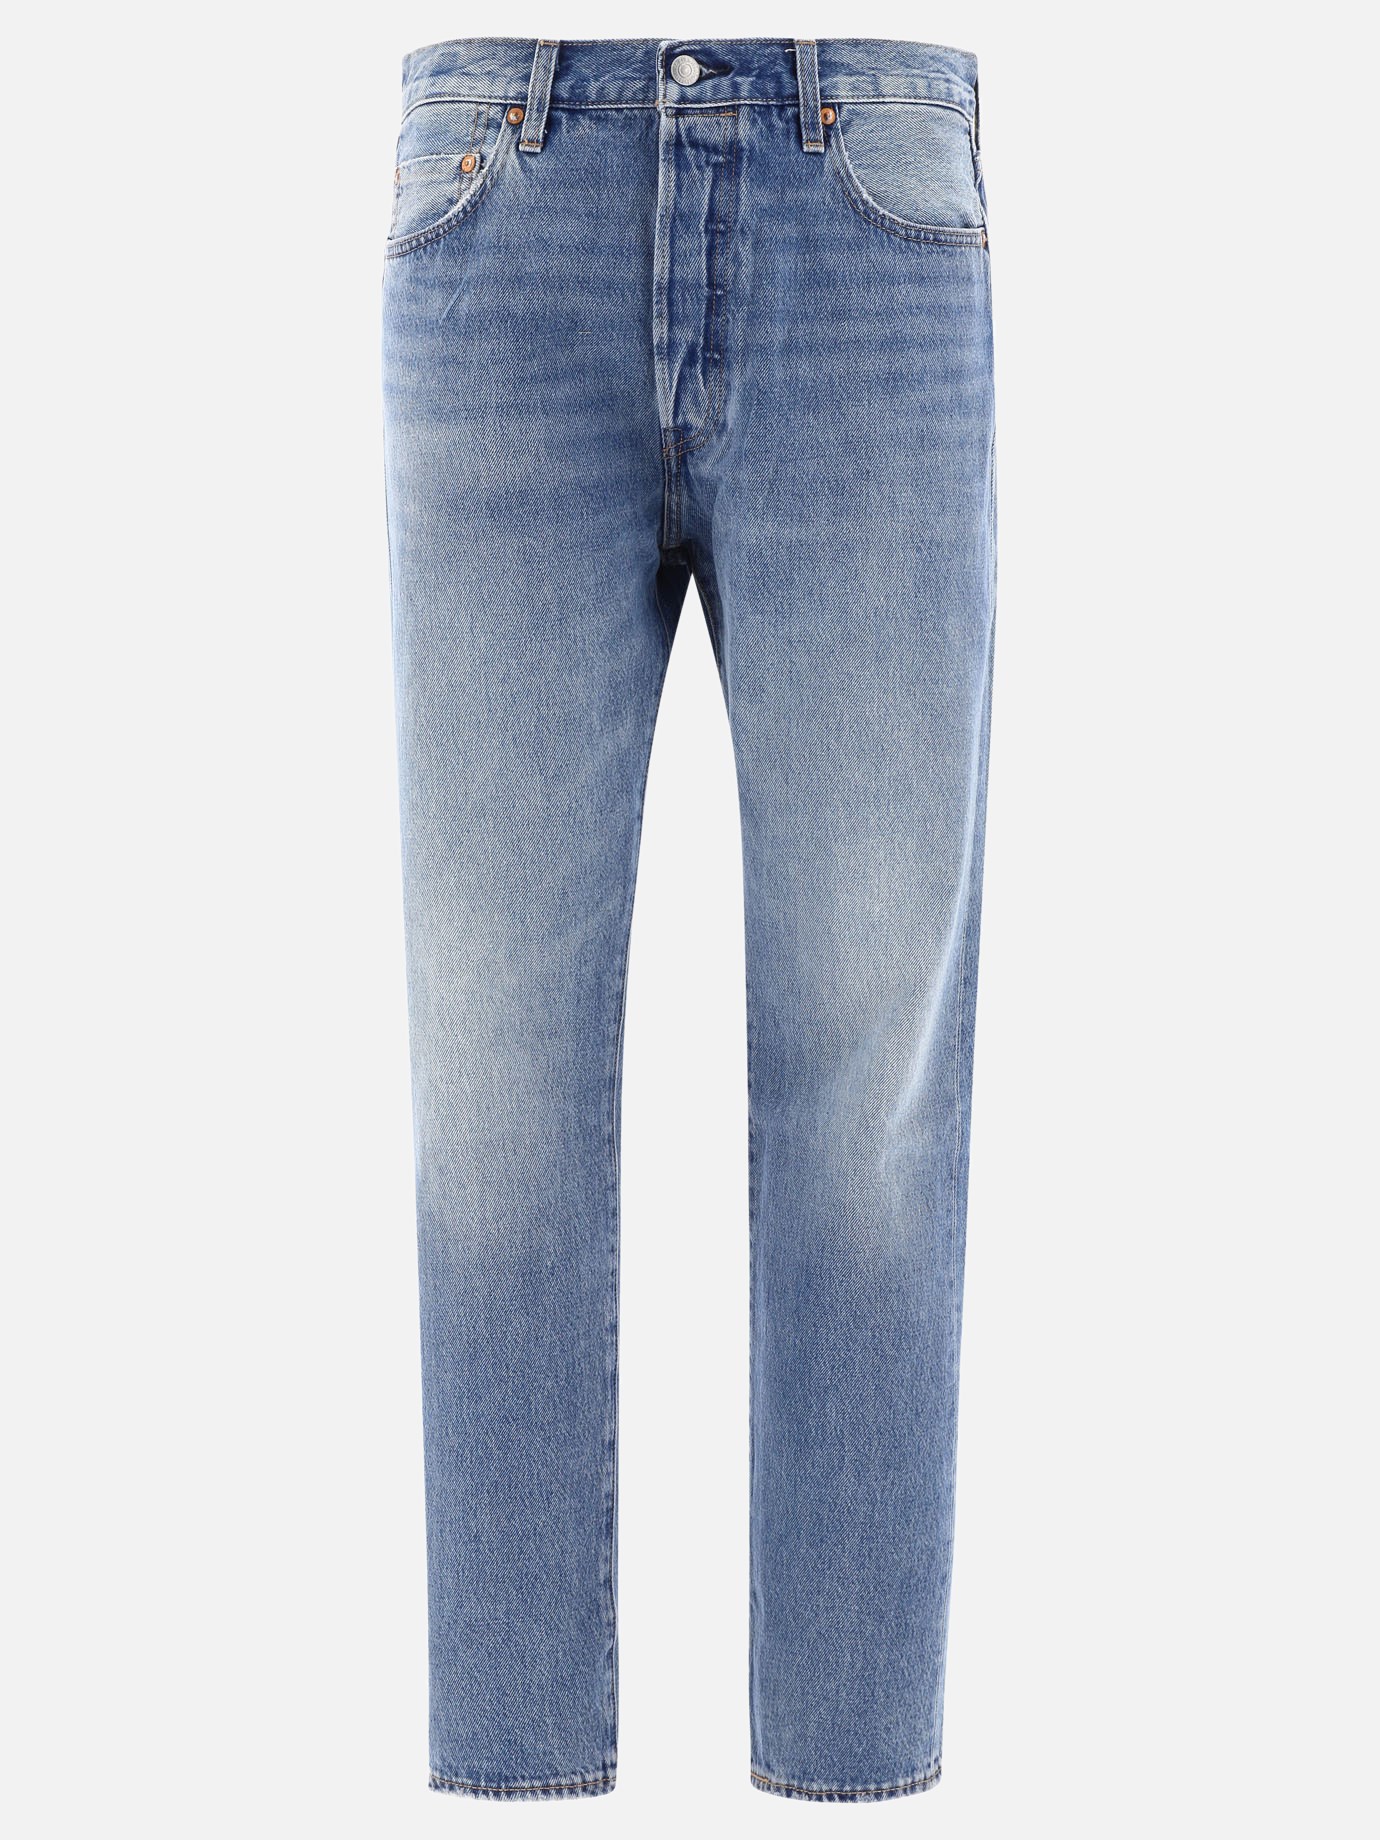 Jeans  501 by Levi's Made & Crafted - 2